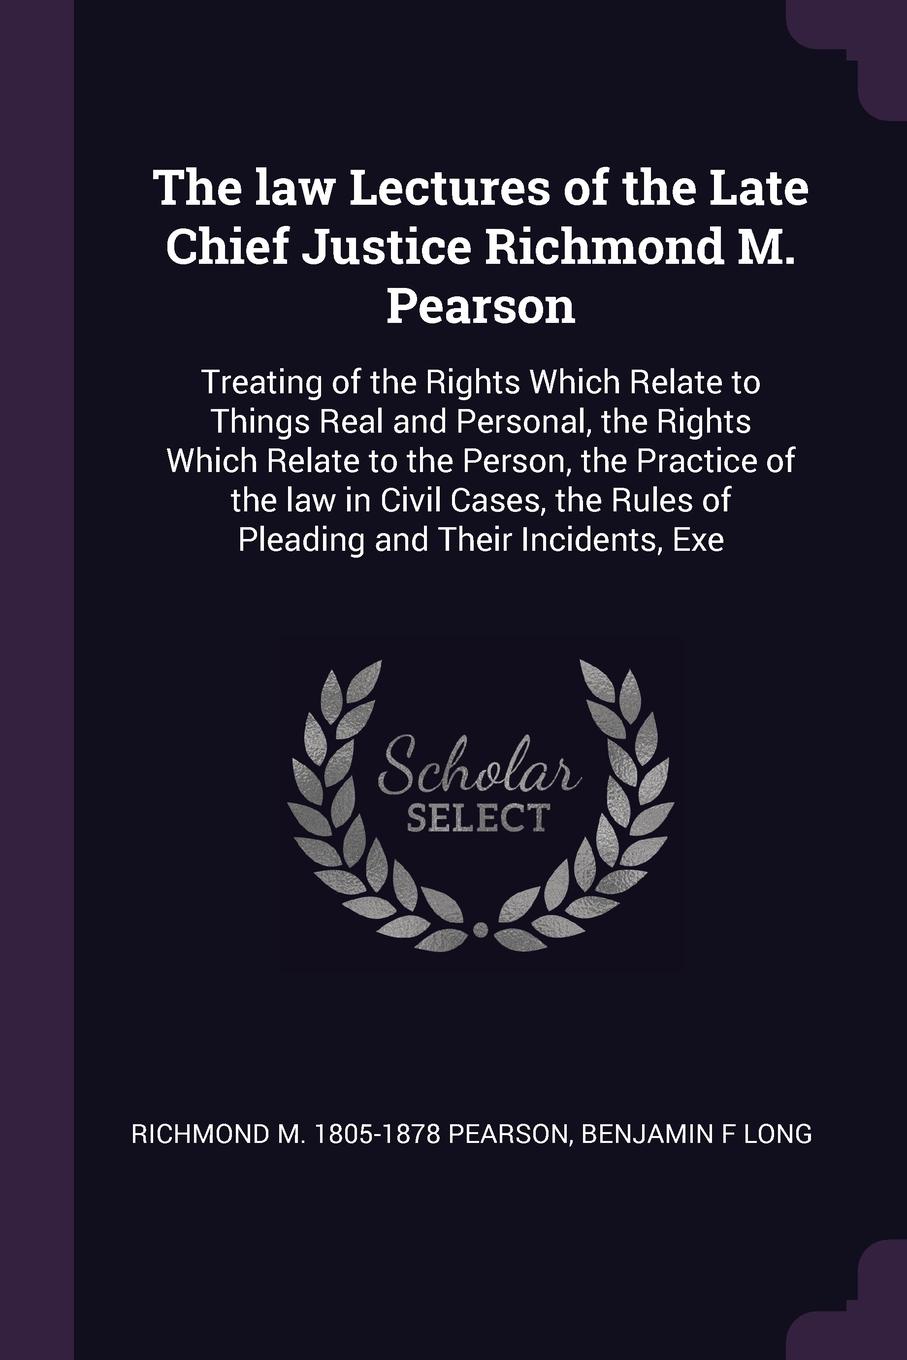 The law Lectures of the Late Chief Justice Richmond M. Pearson. Treating of the Rights Which Relate to Things Real and Personal, the Rights Which Relate to the Person, the Practice of the law in Civil Cases, the Rules of Pleading and Their Inciden...